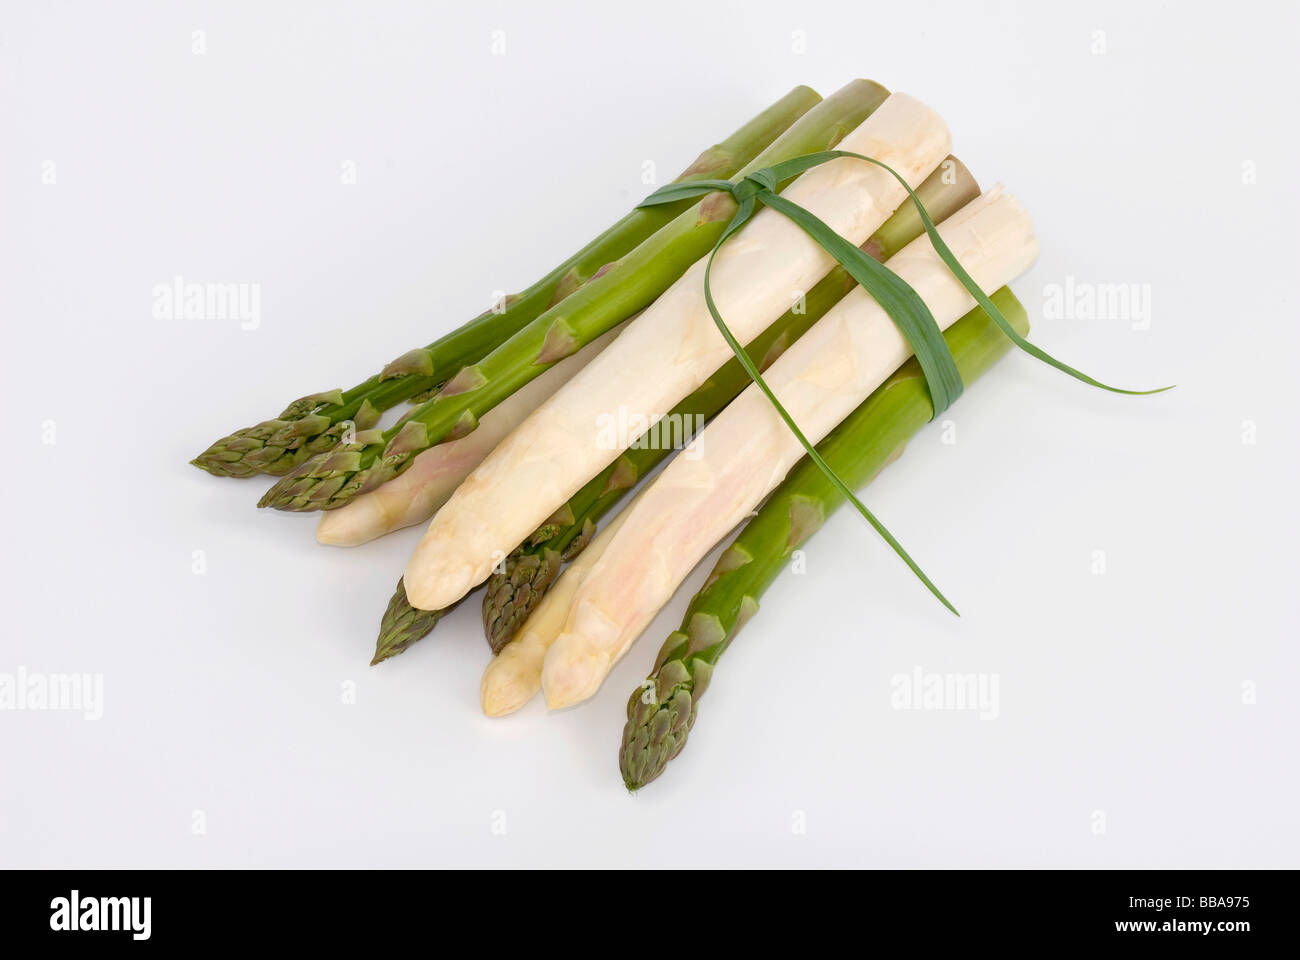 Bunch of green and white asparagus Stock Photo